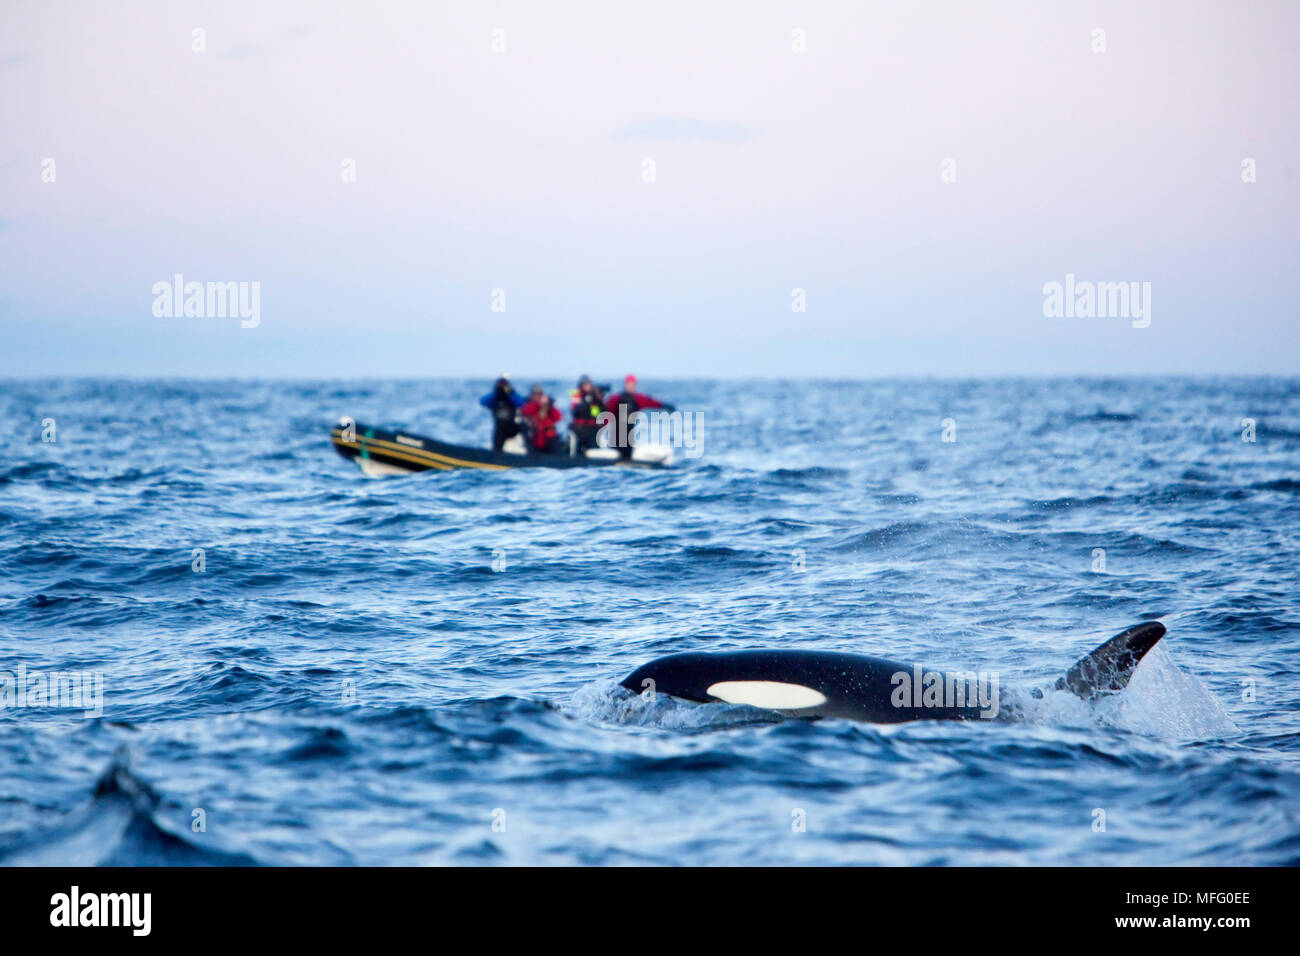 Killer whale, Orcinus orca, surfacing close to the zodiac, Norway, Atlantic Ocean Stock Photo